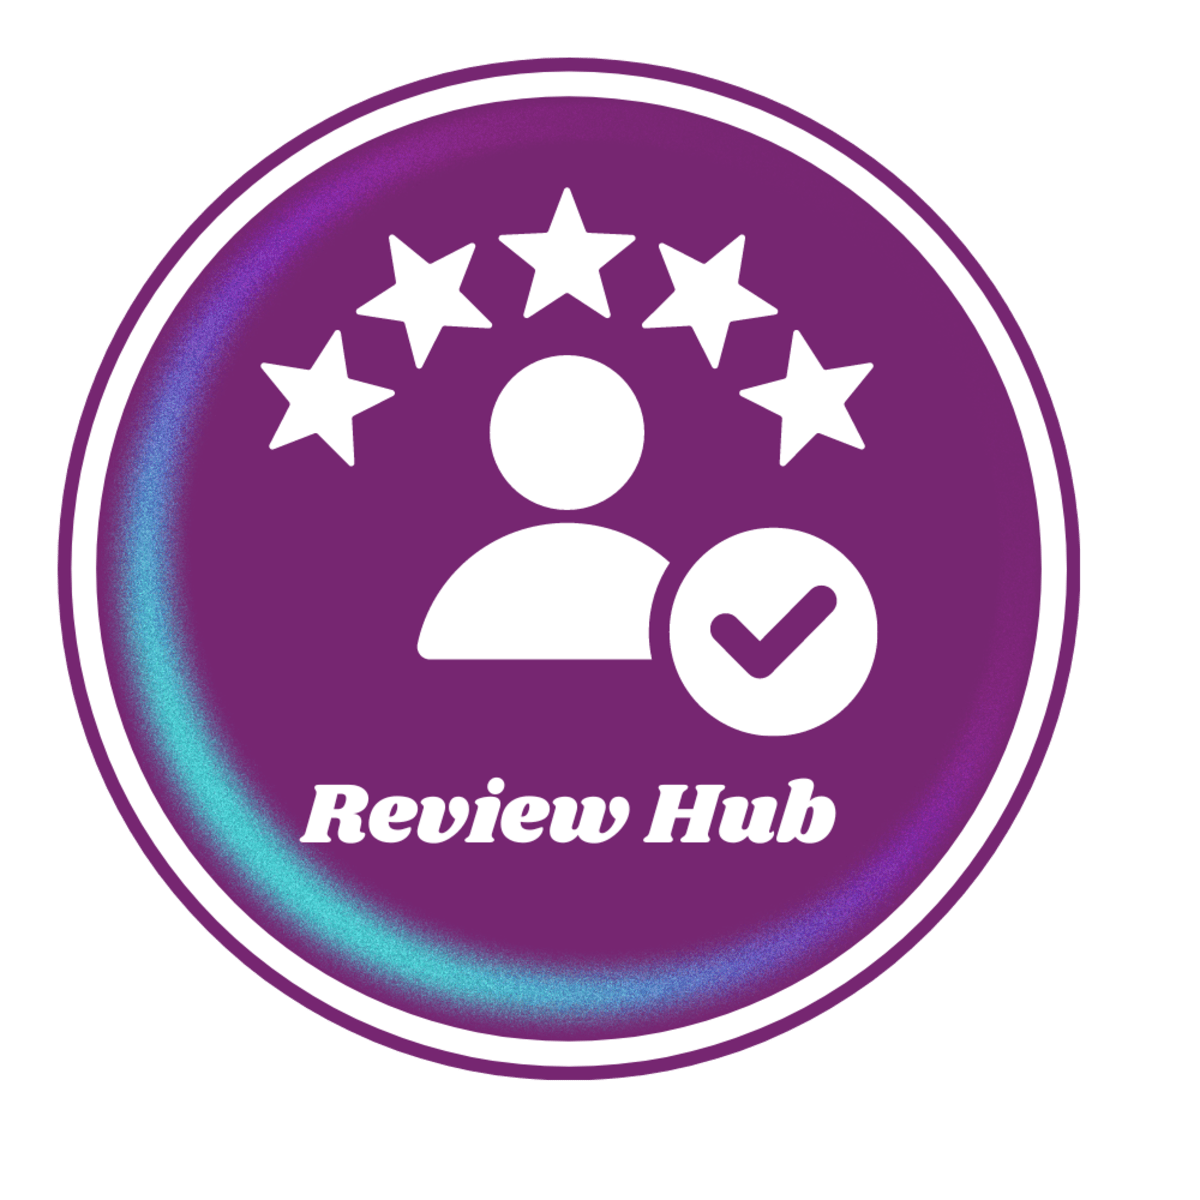 ReviewHub Product Review + SEO